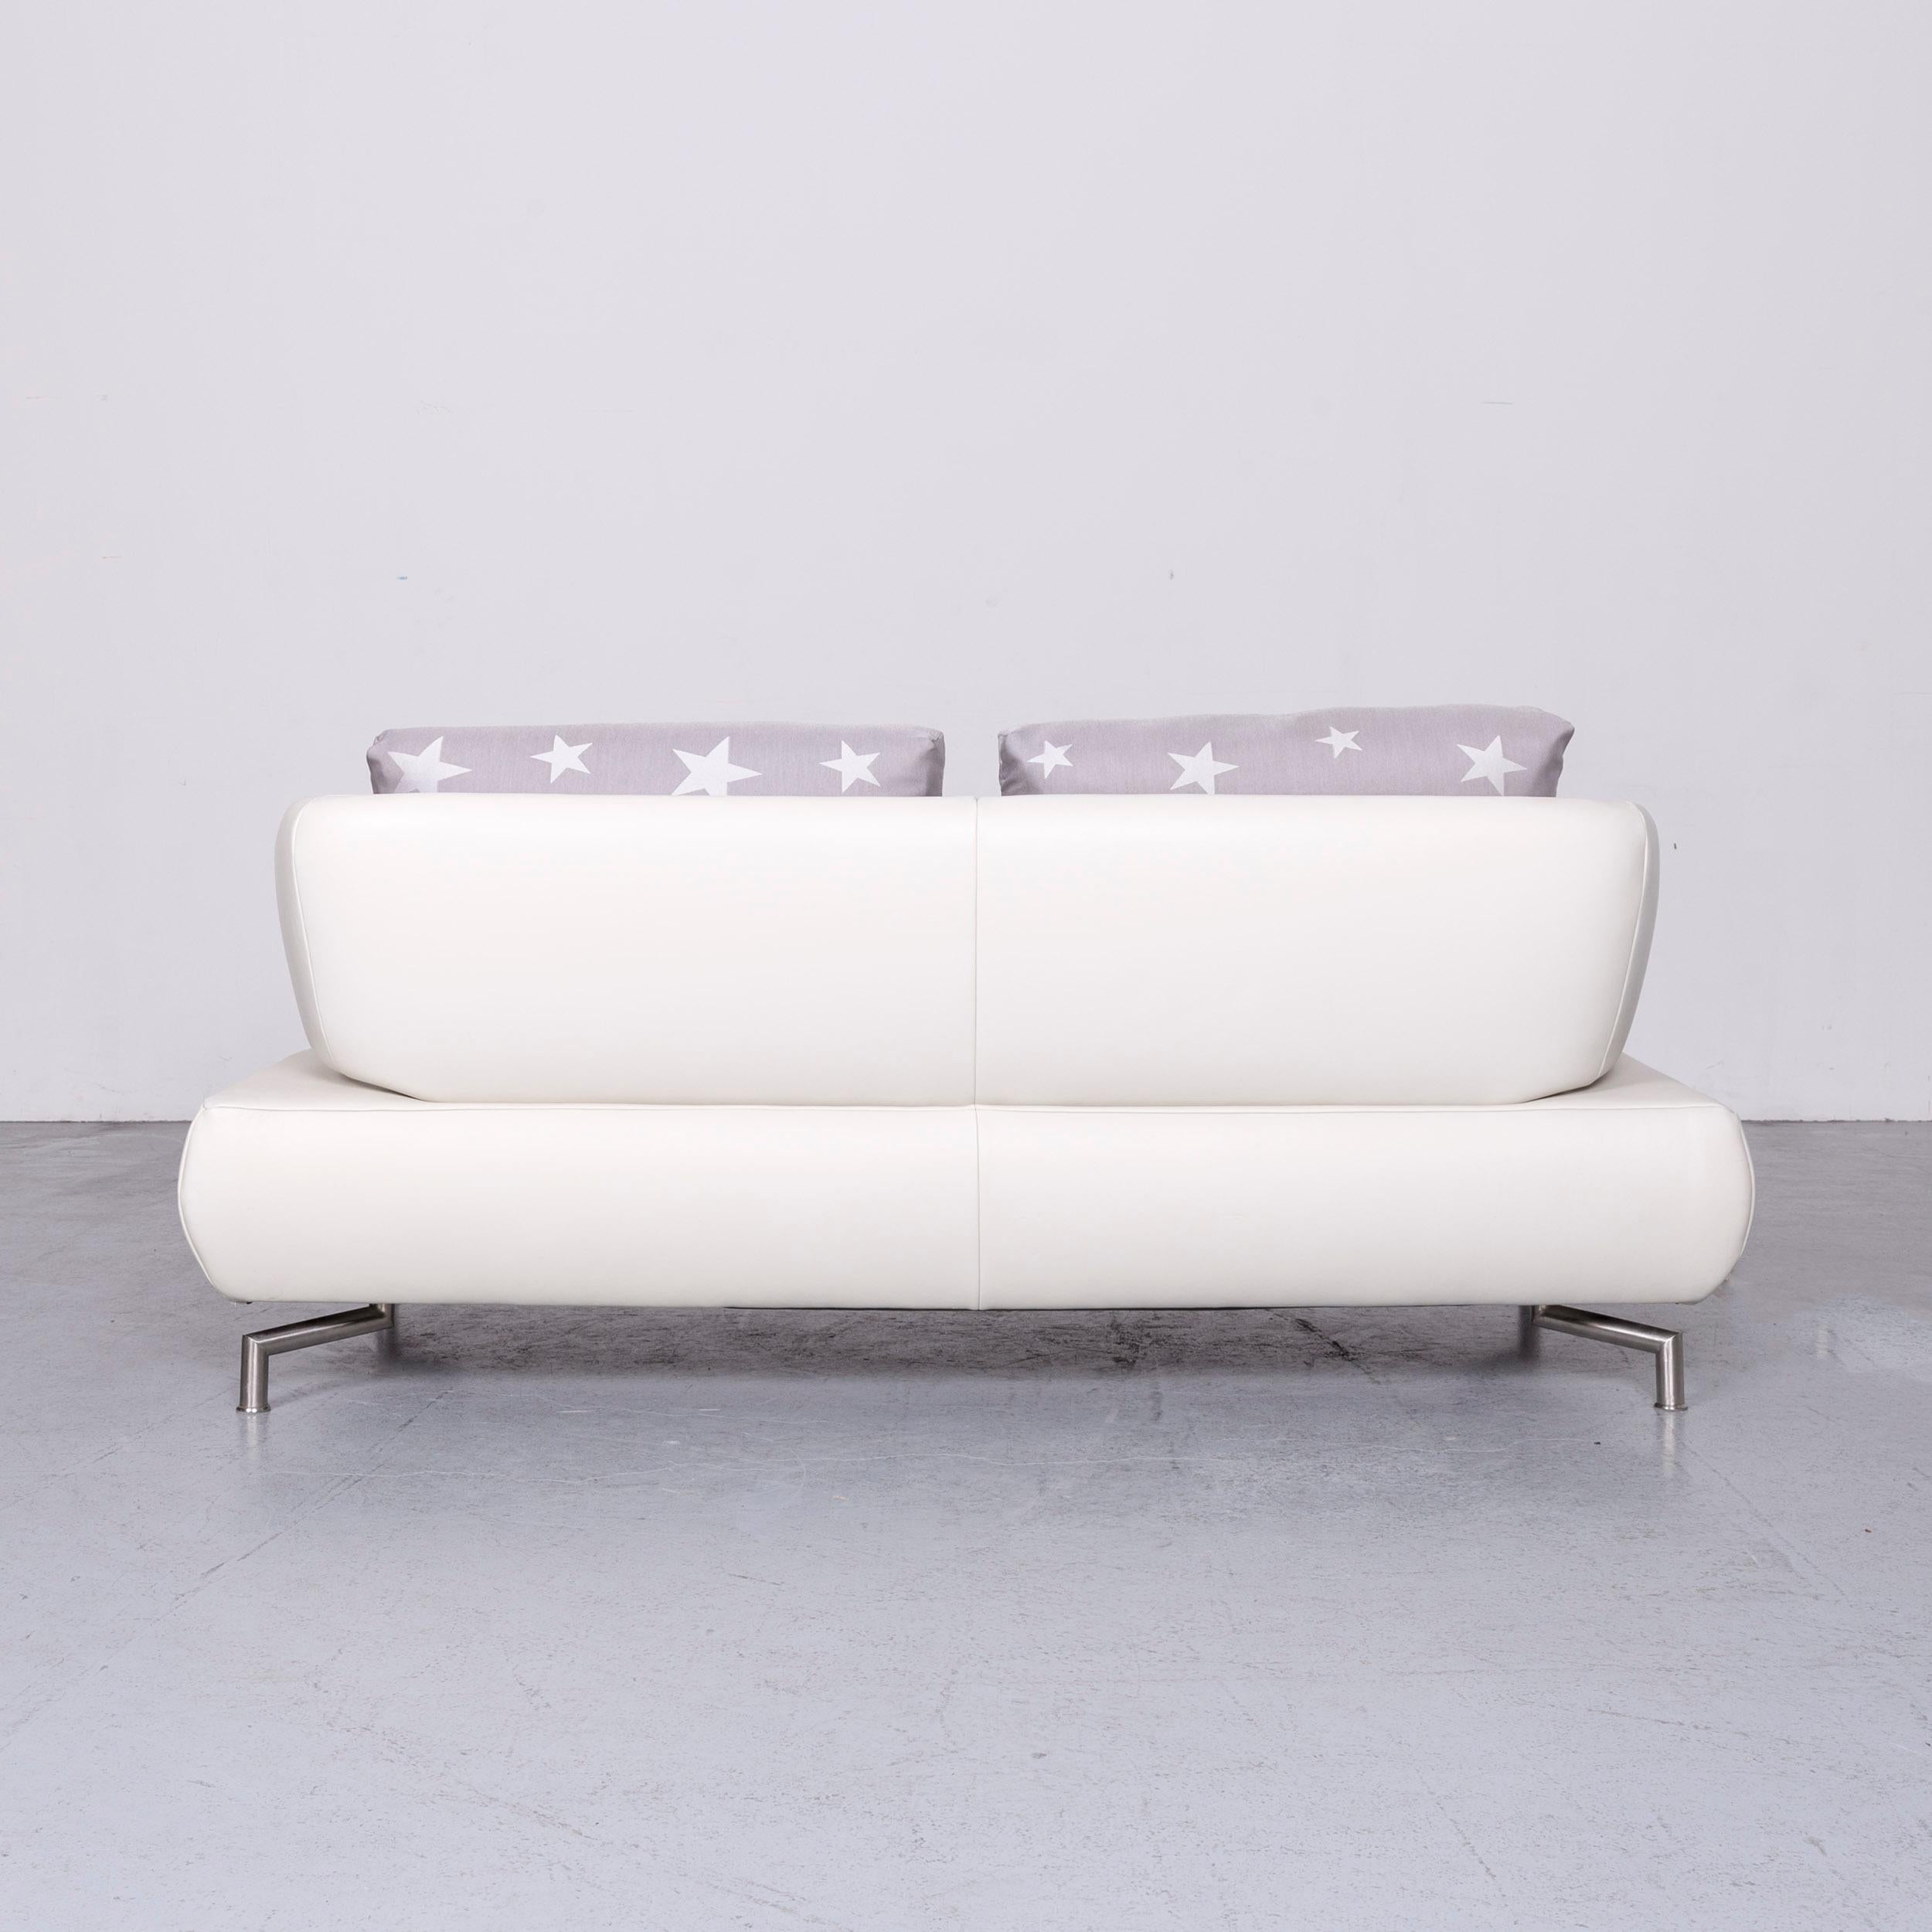 Koinor Designer Two-Seat Sofa White Leather Couch with Pillow 6